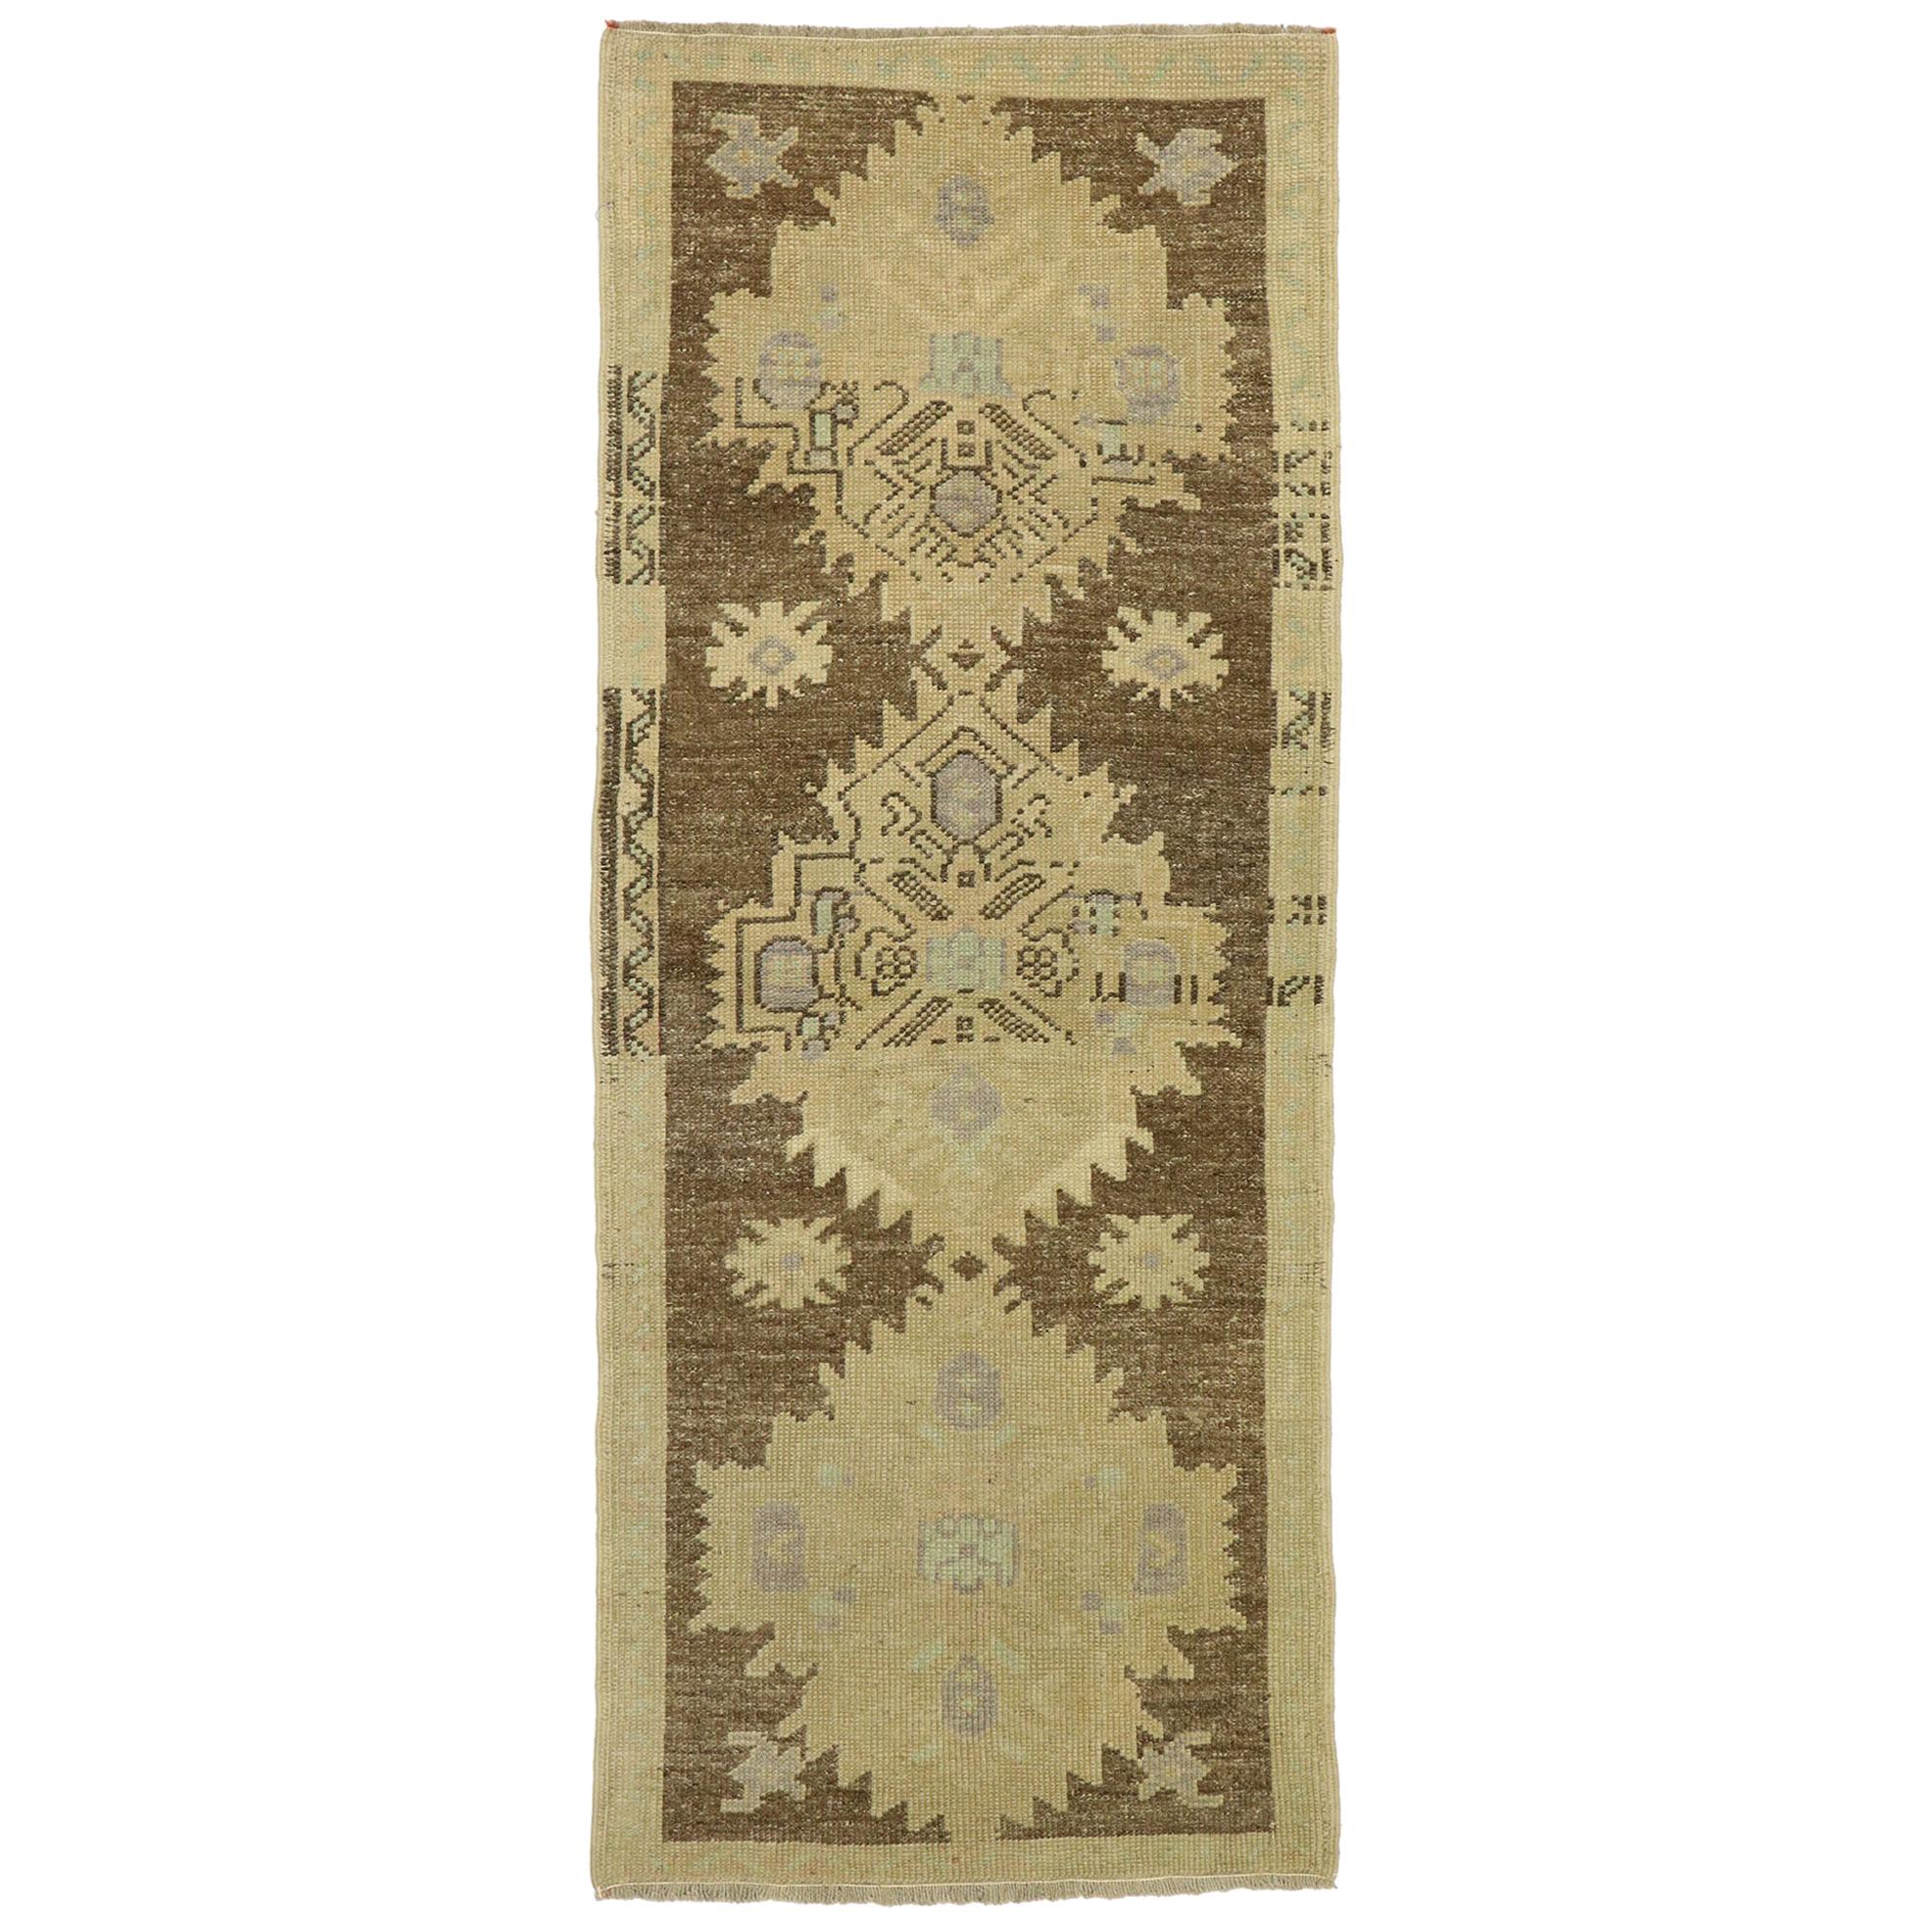 Vintage Turkish Oushak Accent Rug with Rustic Shaker Farmhouse Style For Sale